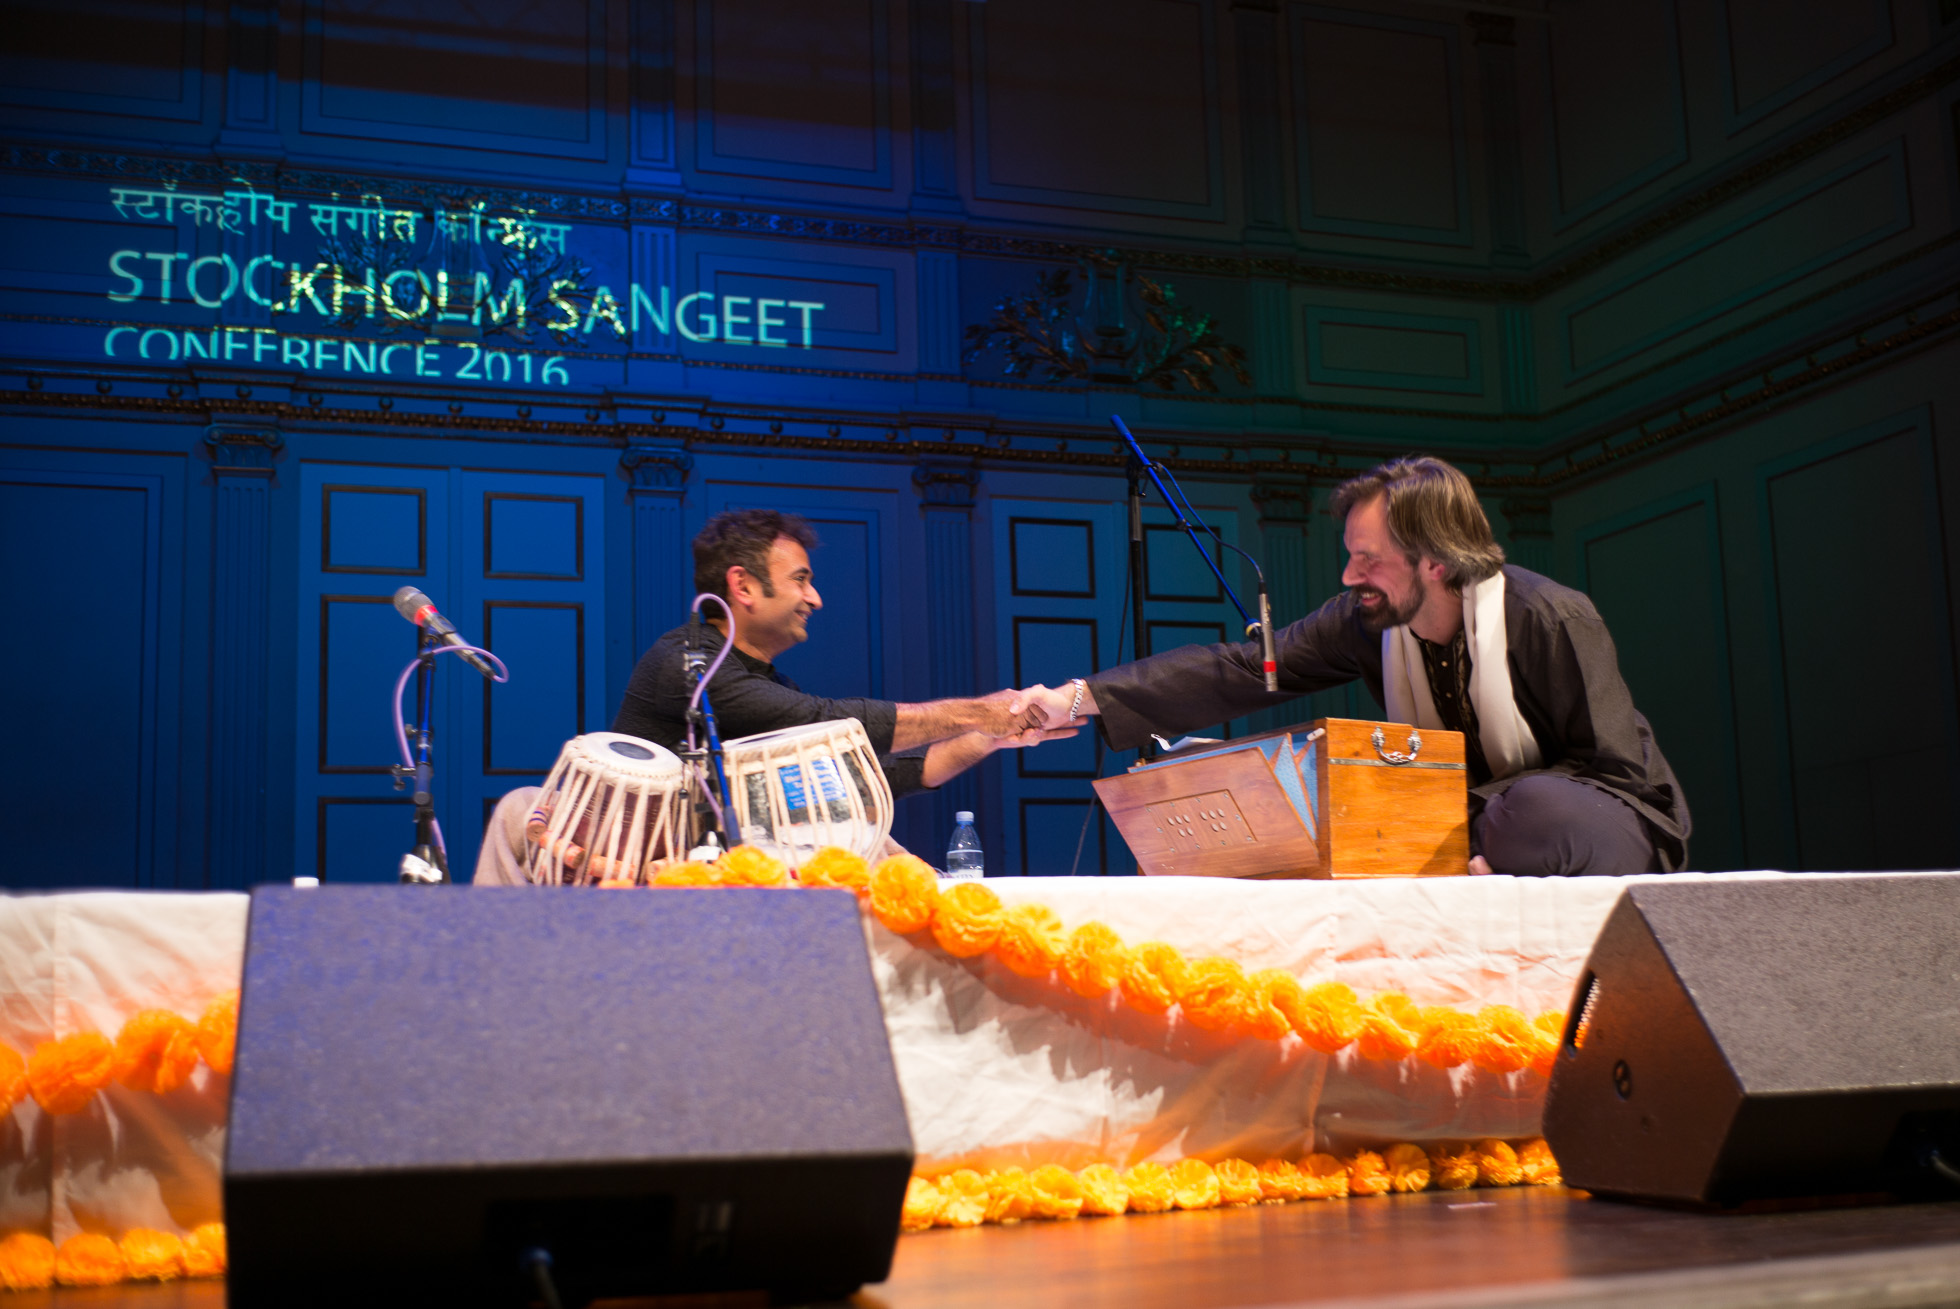 2016-10-16-stockholm-sangeet-conference-2016_2016-10-16_max-dahlstrand_0385